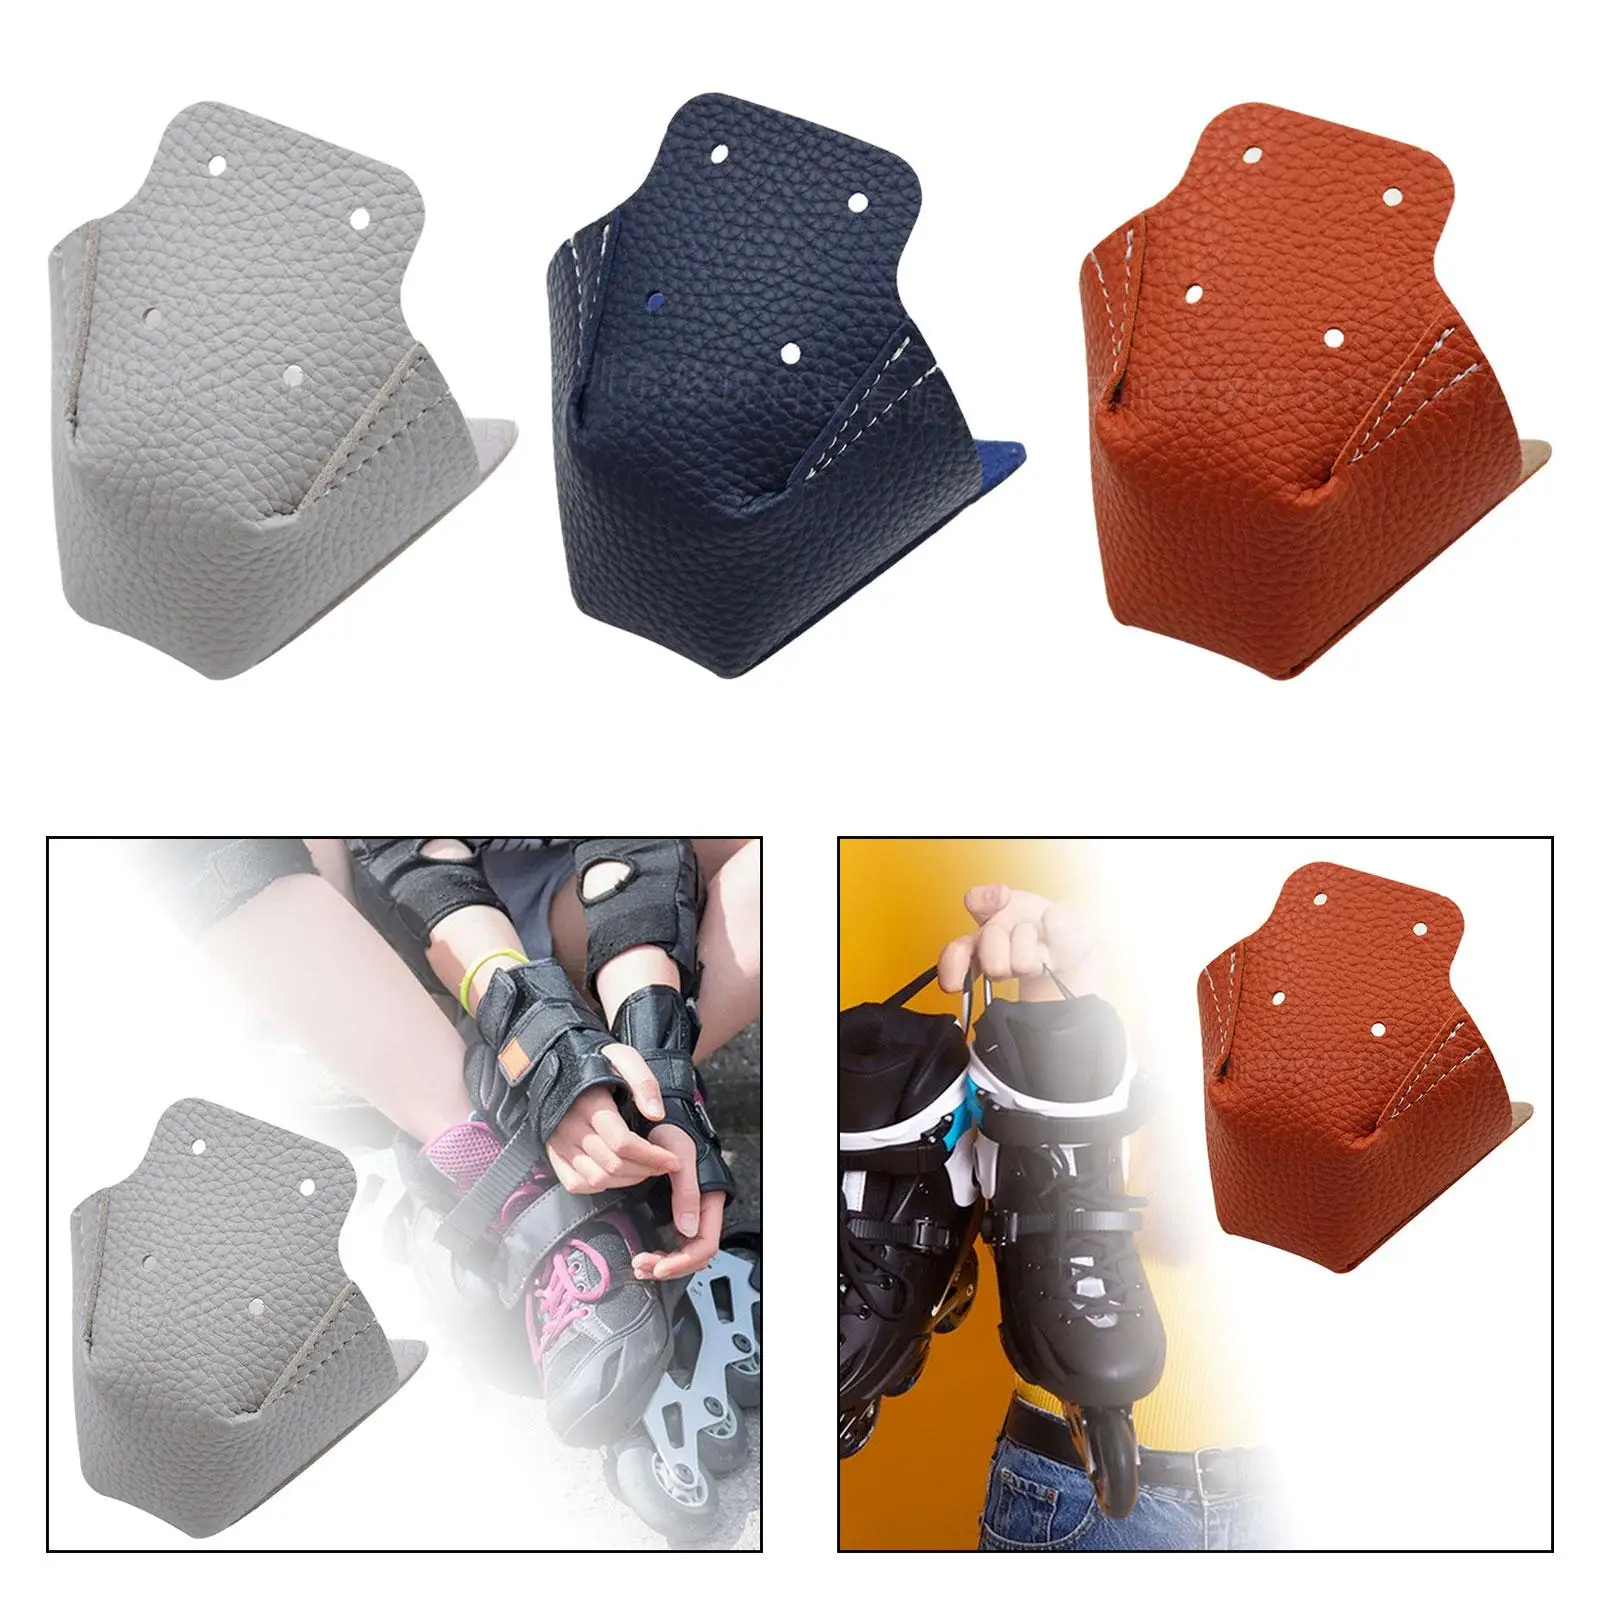 Roller Skate Toe Protector Detachable Durable Protective Cover for Outdoor Sports Skating Quad Roller Skate Shoes Supplies